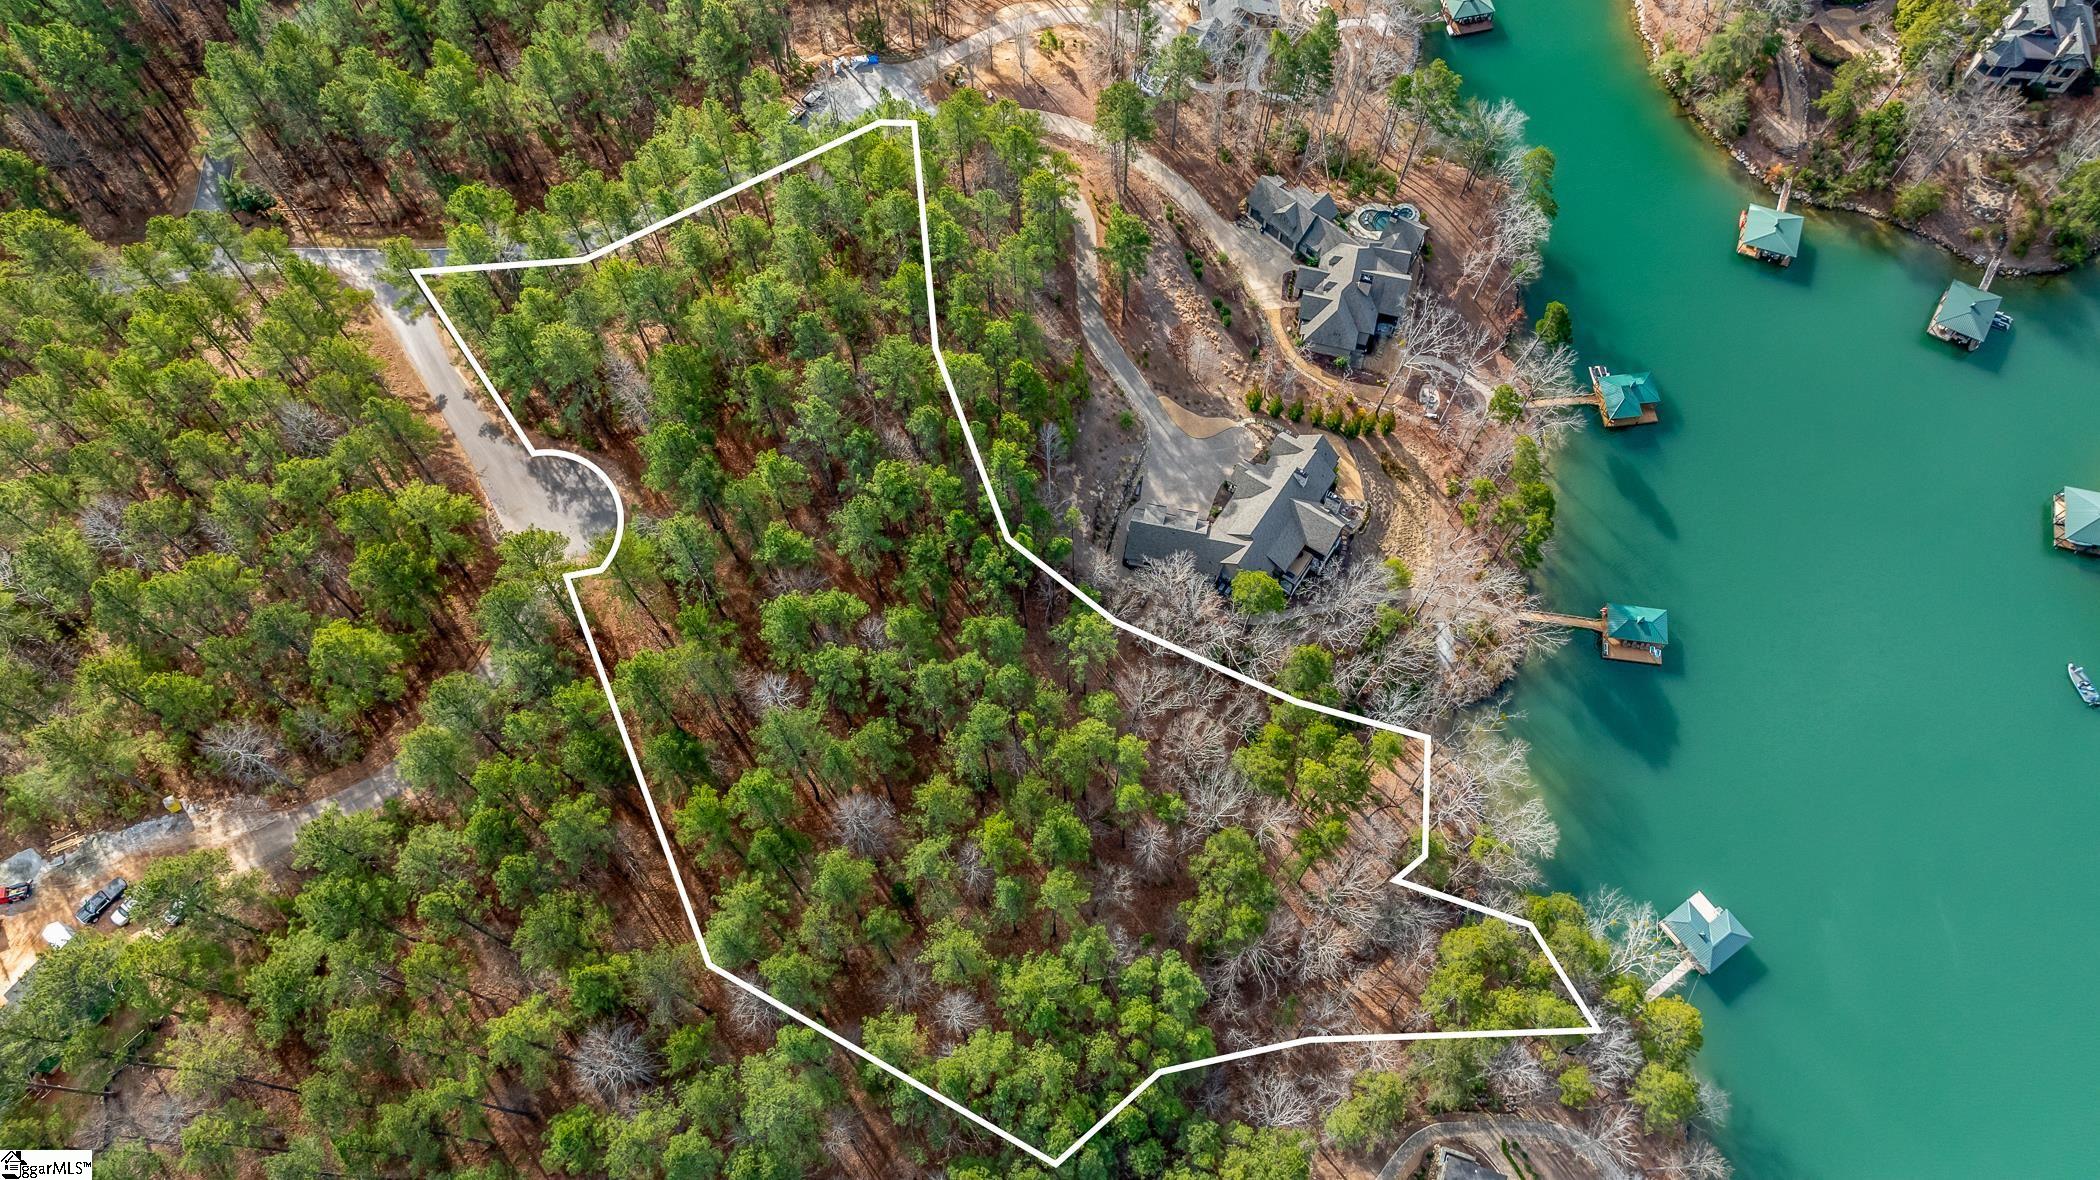 Two are better than one!!! The chance to acquire not one, but two adjacent lots is a rarity. Located at 105 Reflection Ct., these highly desired properties offer a combined 3.62+/- acres on the picturesque Lake Keowee, in the sought-after community of The Cliffs at Keowee Springs.Situated on a tranquil cul-de-sac, both lots provide an ideal setting that will allow you to enjoy the perks of waterfront living, including family activities and water sports in a private cove. These properties feature natural stone shoreline stabilization and approximately 240’+/- of lake frontage. With their versatile terrain, they provide endless possibilities for your lakefront home design and layout, whether you yearn for mountain vistas and lake views or prefer to be right on the tranquil waters of Lake Keowee. Lot 26 spans 2.27 acres and has been dock approved, while Lot 27 encompasses 1.35 acres and includes a covered dock. Utilize both for your custom build or build on one lot and keep the adjacent lot for extended privacy. Or even save it for a future build for a friend or family members. Join this active community that includes amenities such as a new clubhouse, tennis courts, pickleball courts, golf course, beach club and lake club. A right to purchase a Cliffs club membership is available. Membership grants access to amenities across all seven Cliffs communities. These properties offer an outstanding chance for lakeside family-living at its best. Don't miss out on this unique opportunity.